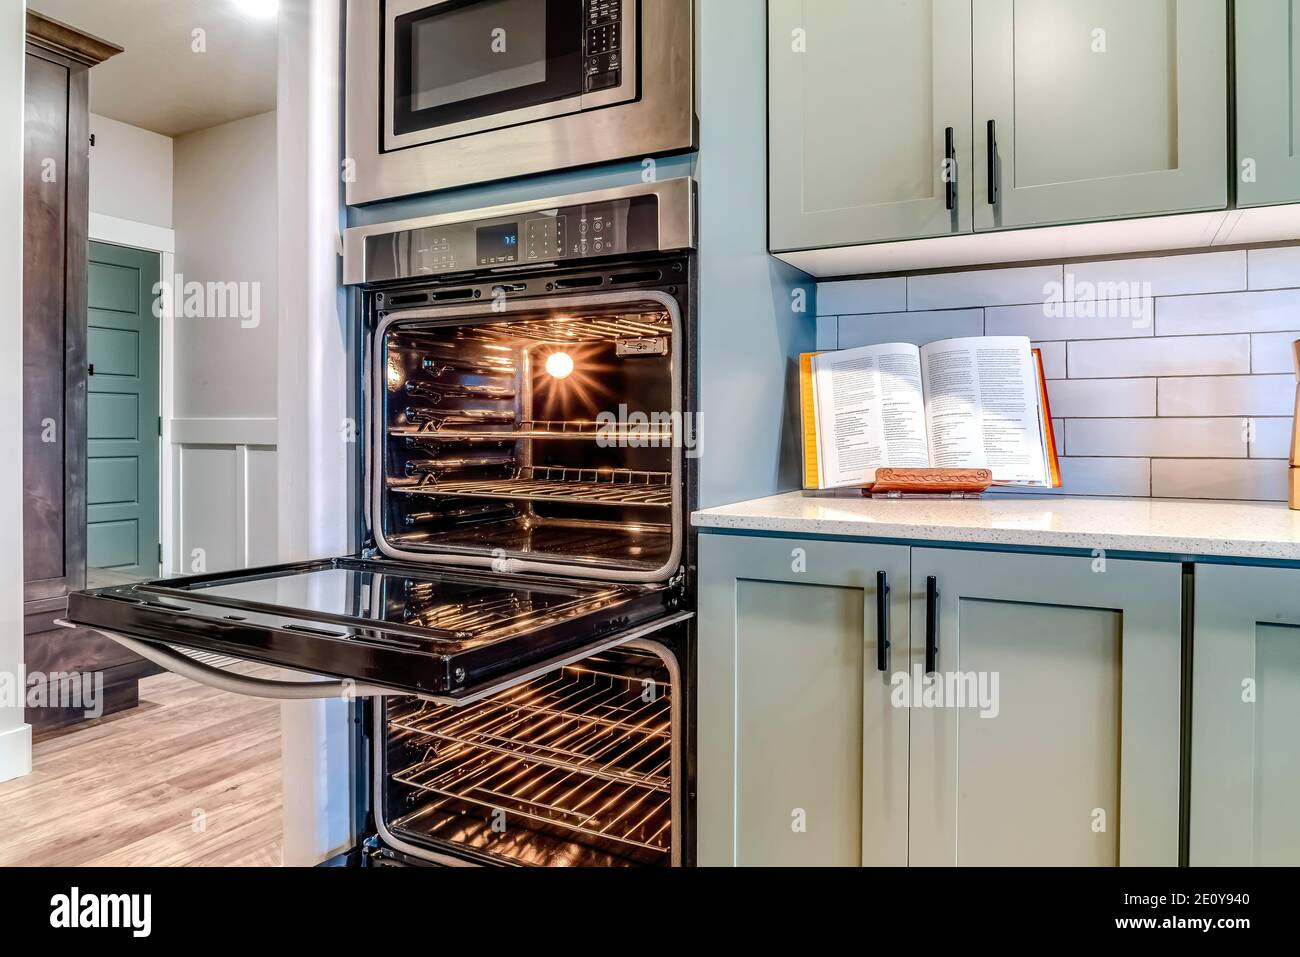 Oven and microwave inside the modern kitchen with built in cabinets and cookbook Stock Photo